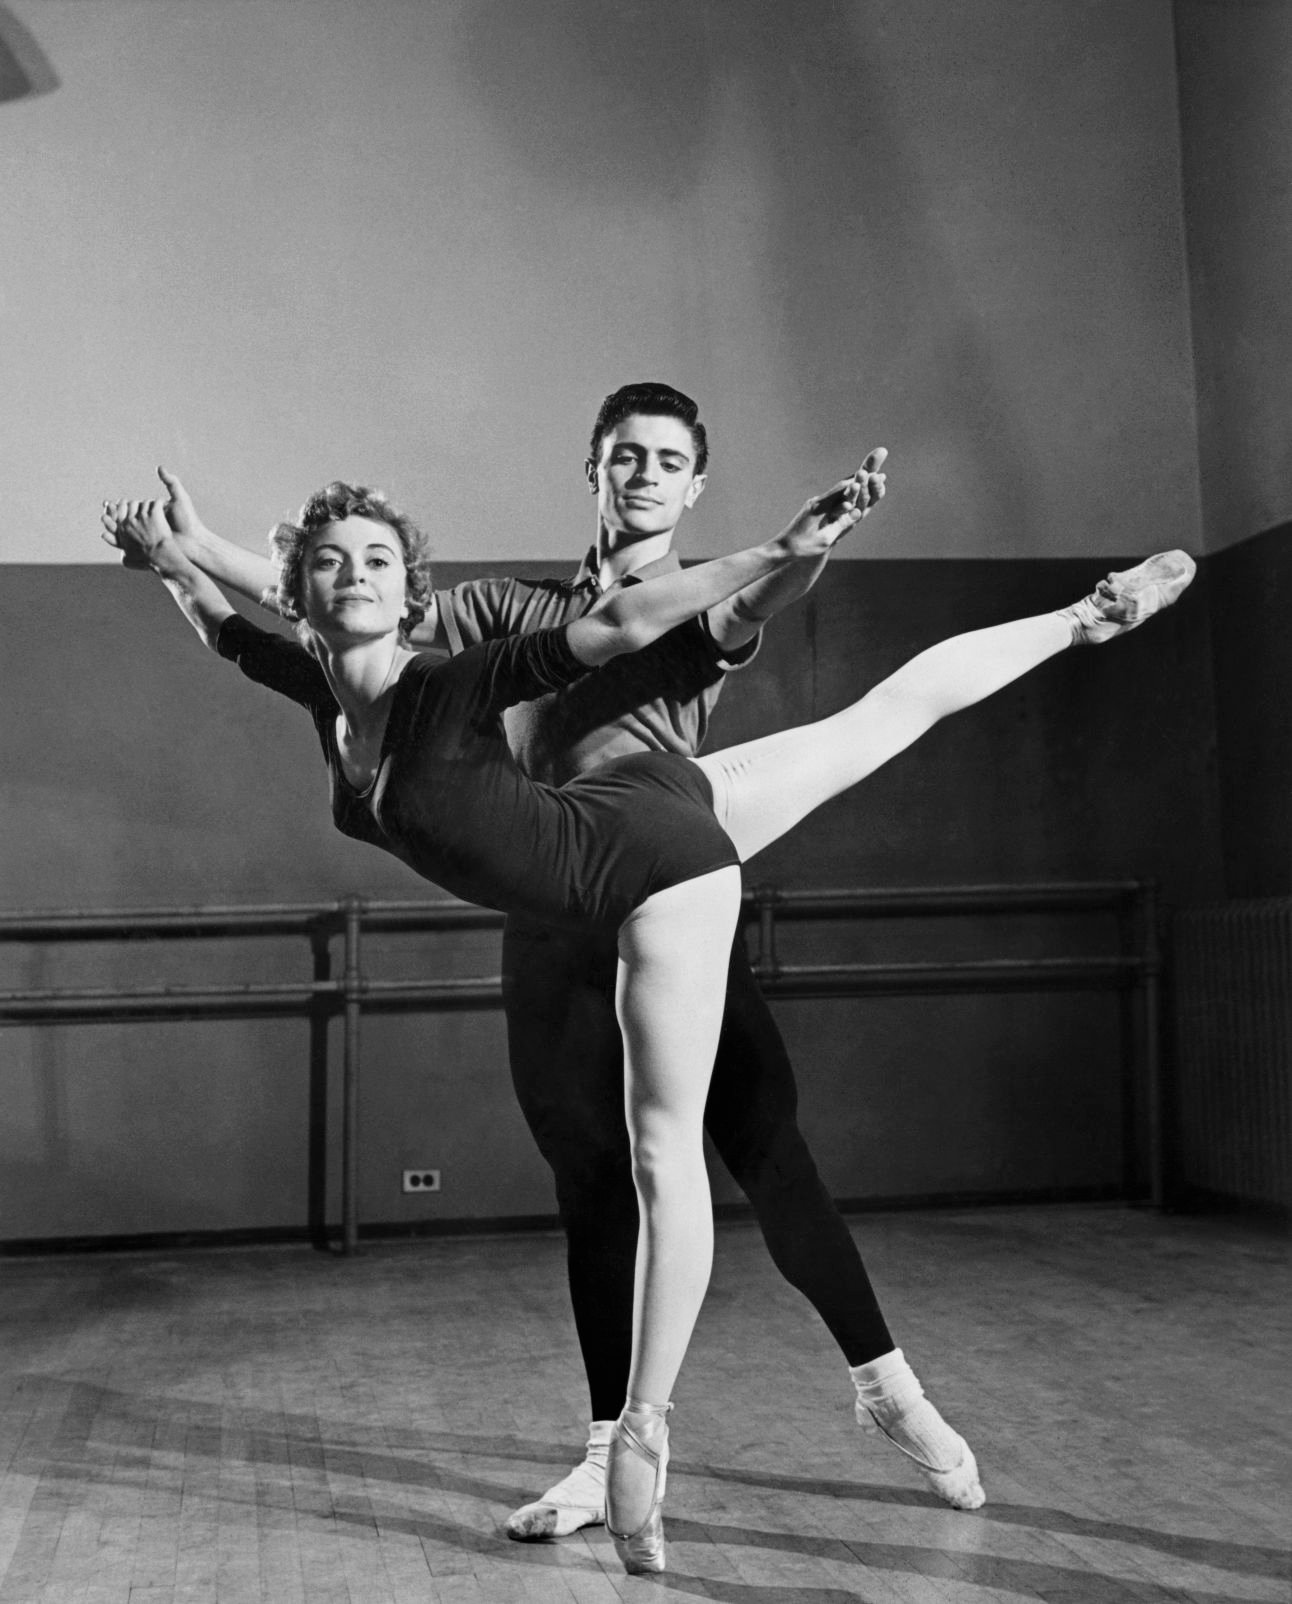 Violette Verdy was a ballerina with flair | Nation | bendbulletin.com